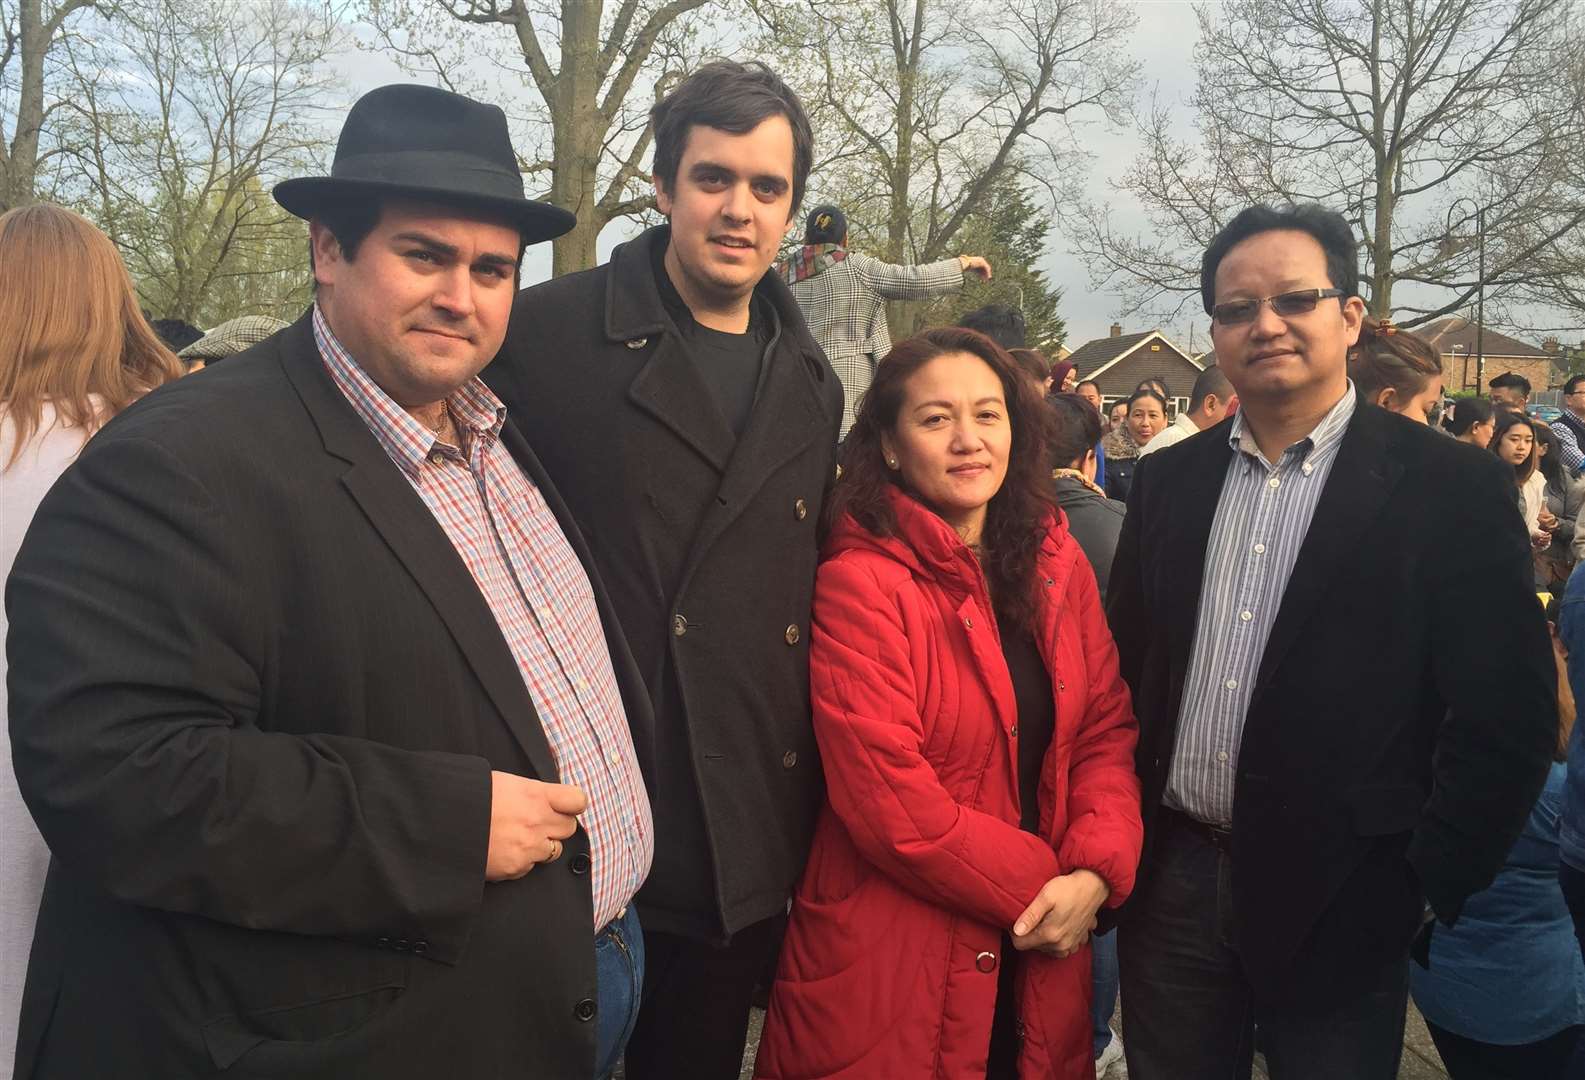 Alex Ward (second from left) pictured in 2015 at a community vigil following the devastating Nepal earthquake